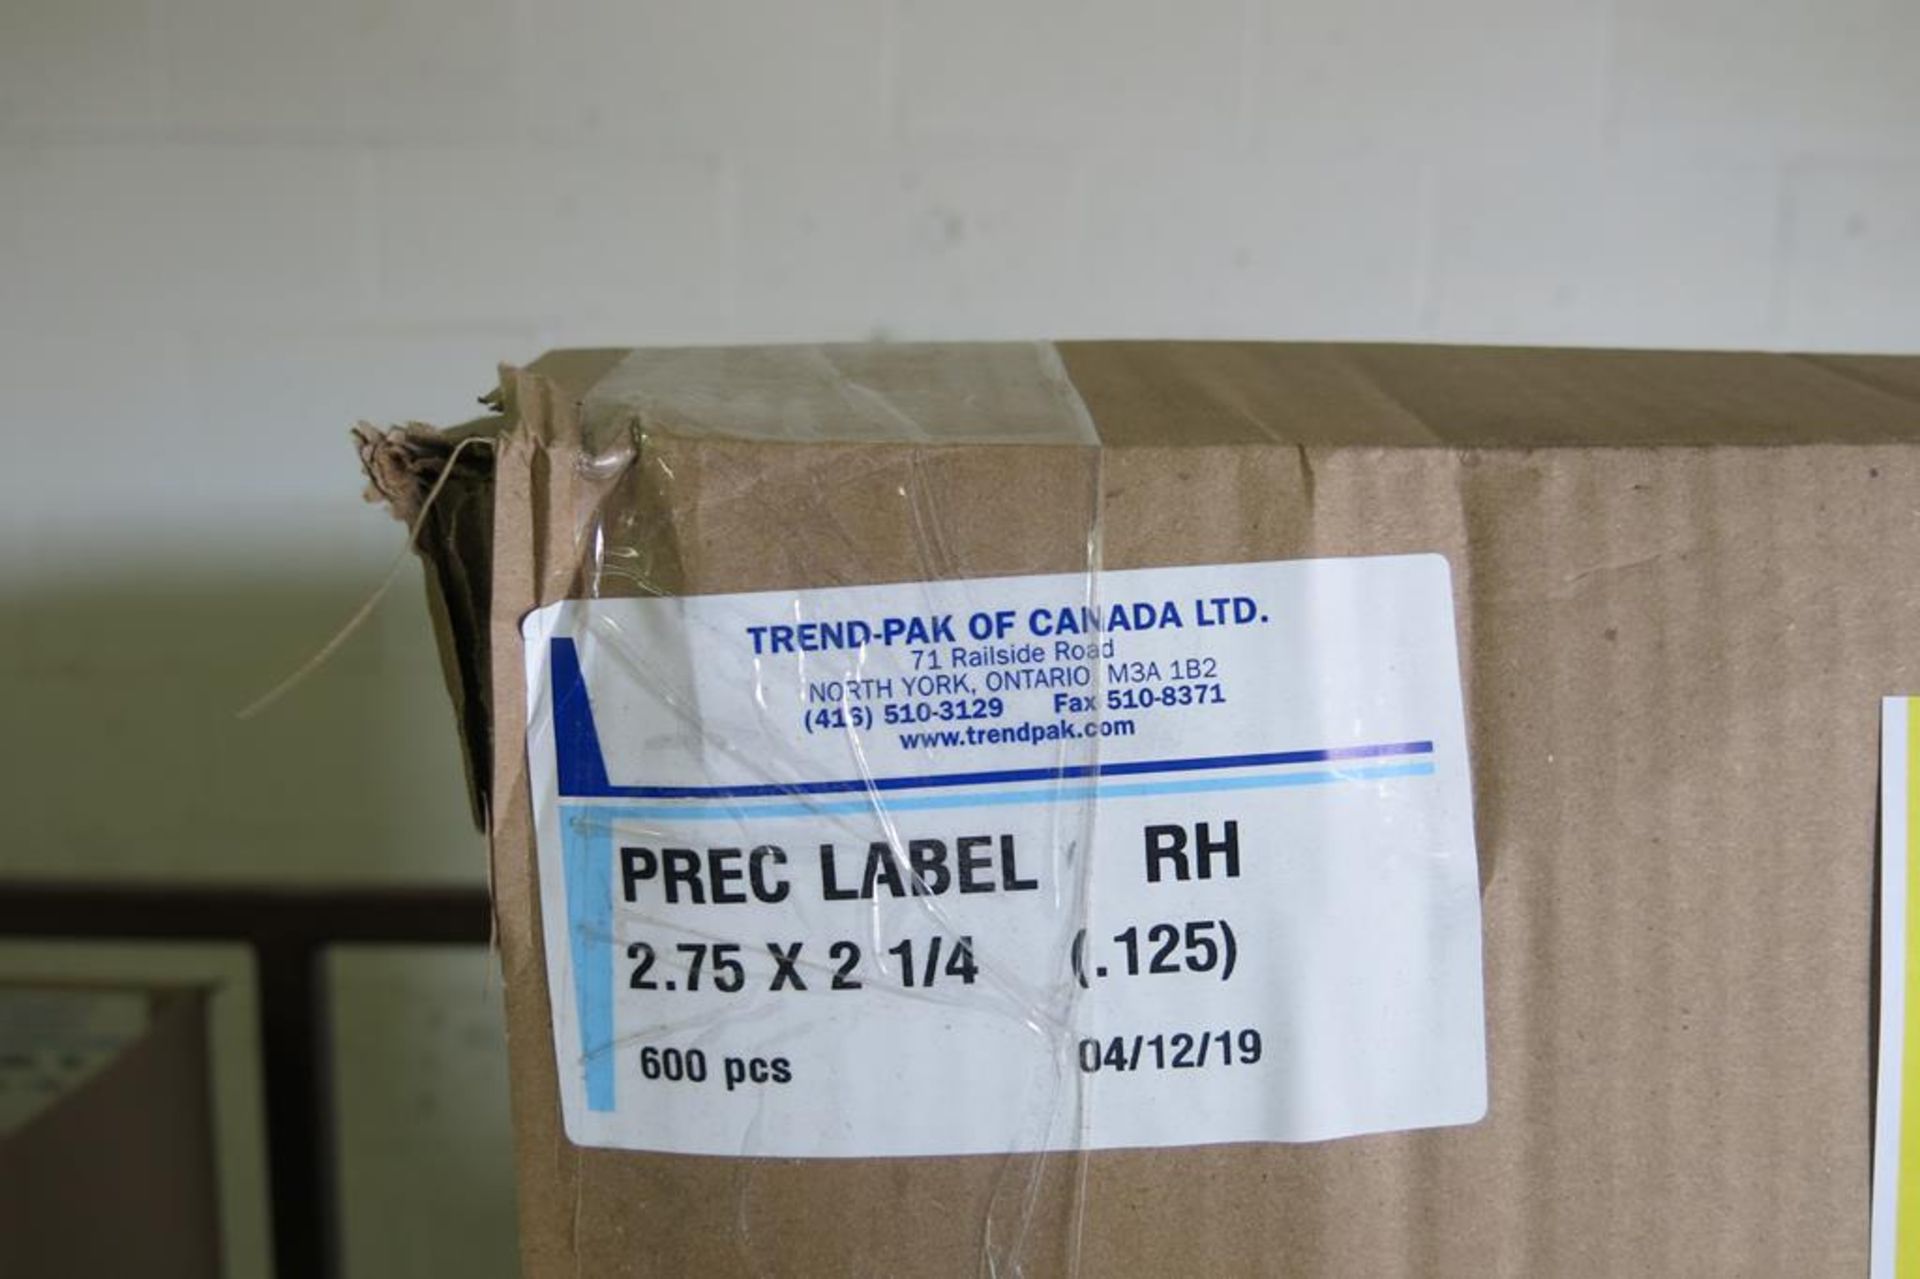 LOT OF TREND-PAK, LABEL CORES, 0.125" WALL THICKNESS - Image 2 of 3